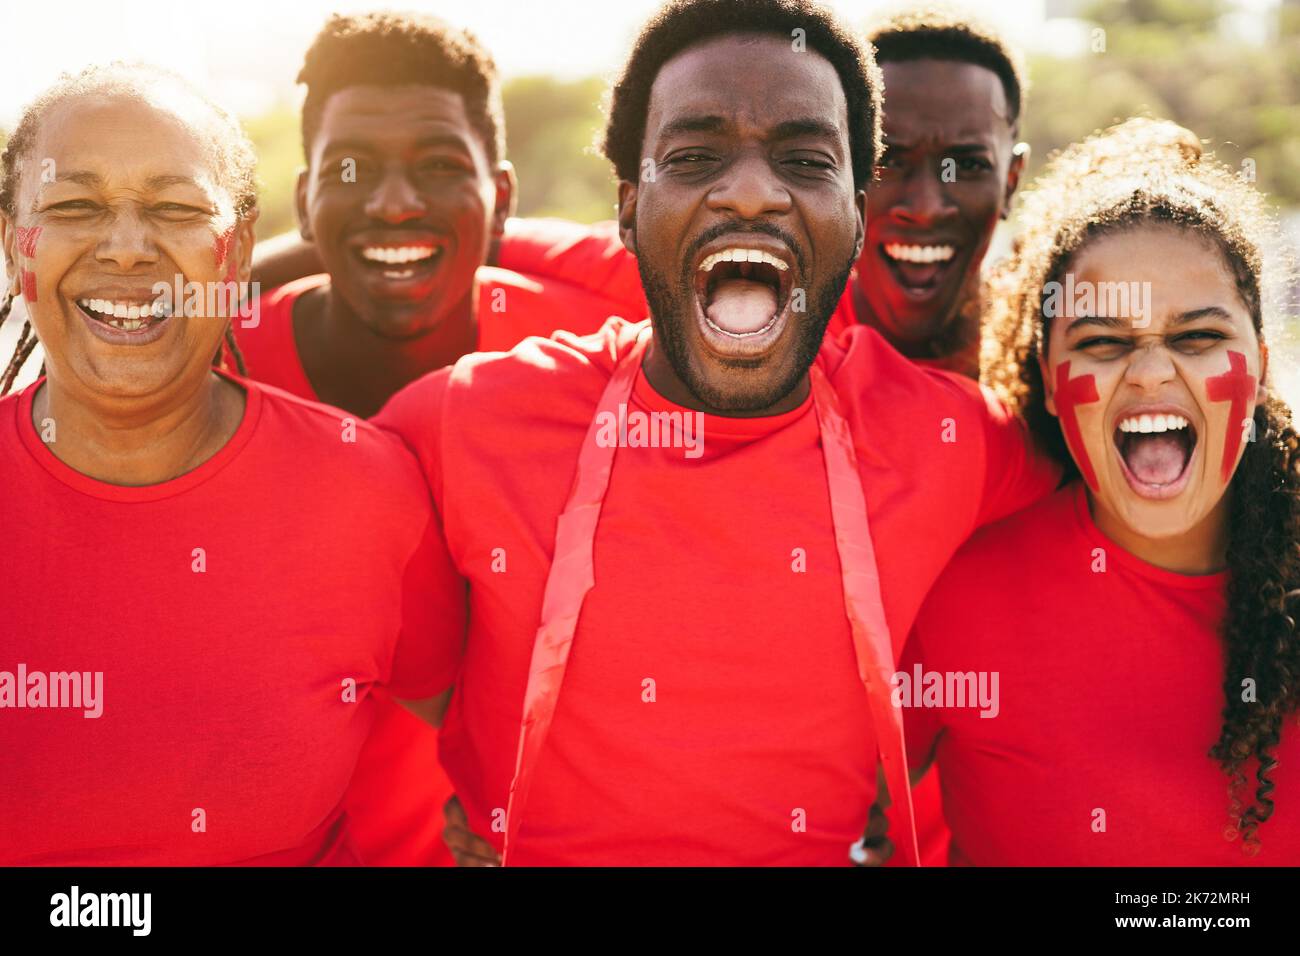 African red sport fans screaming while supporting their team - Football supporters having fun at competition event - Focus on center man face Stock Photo